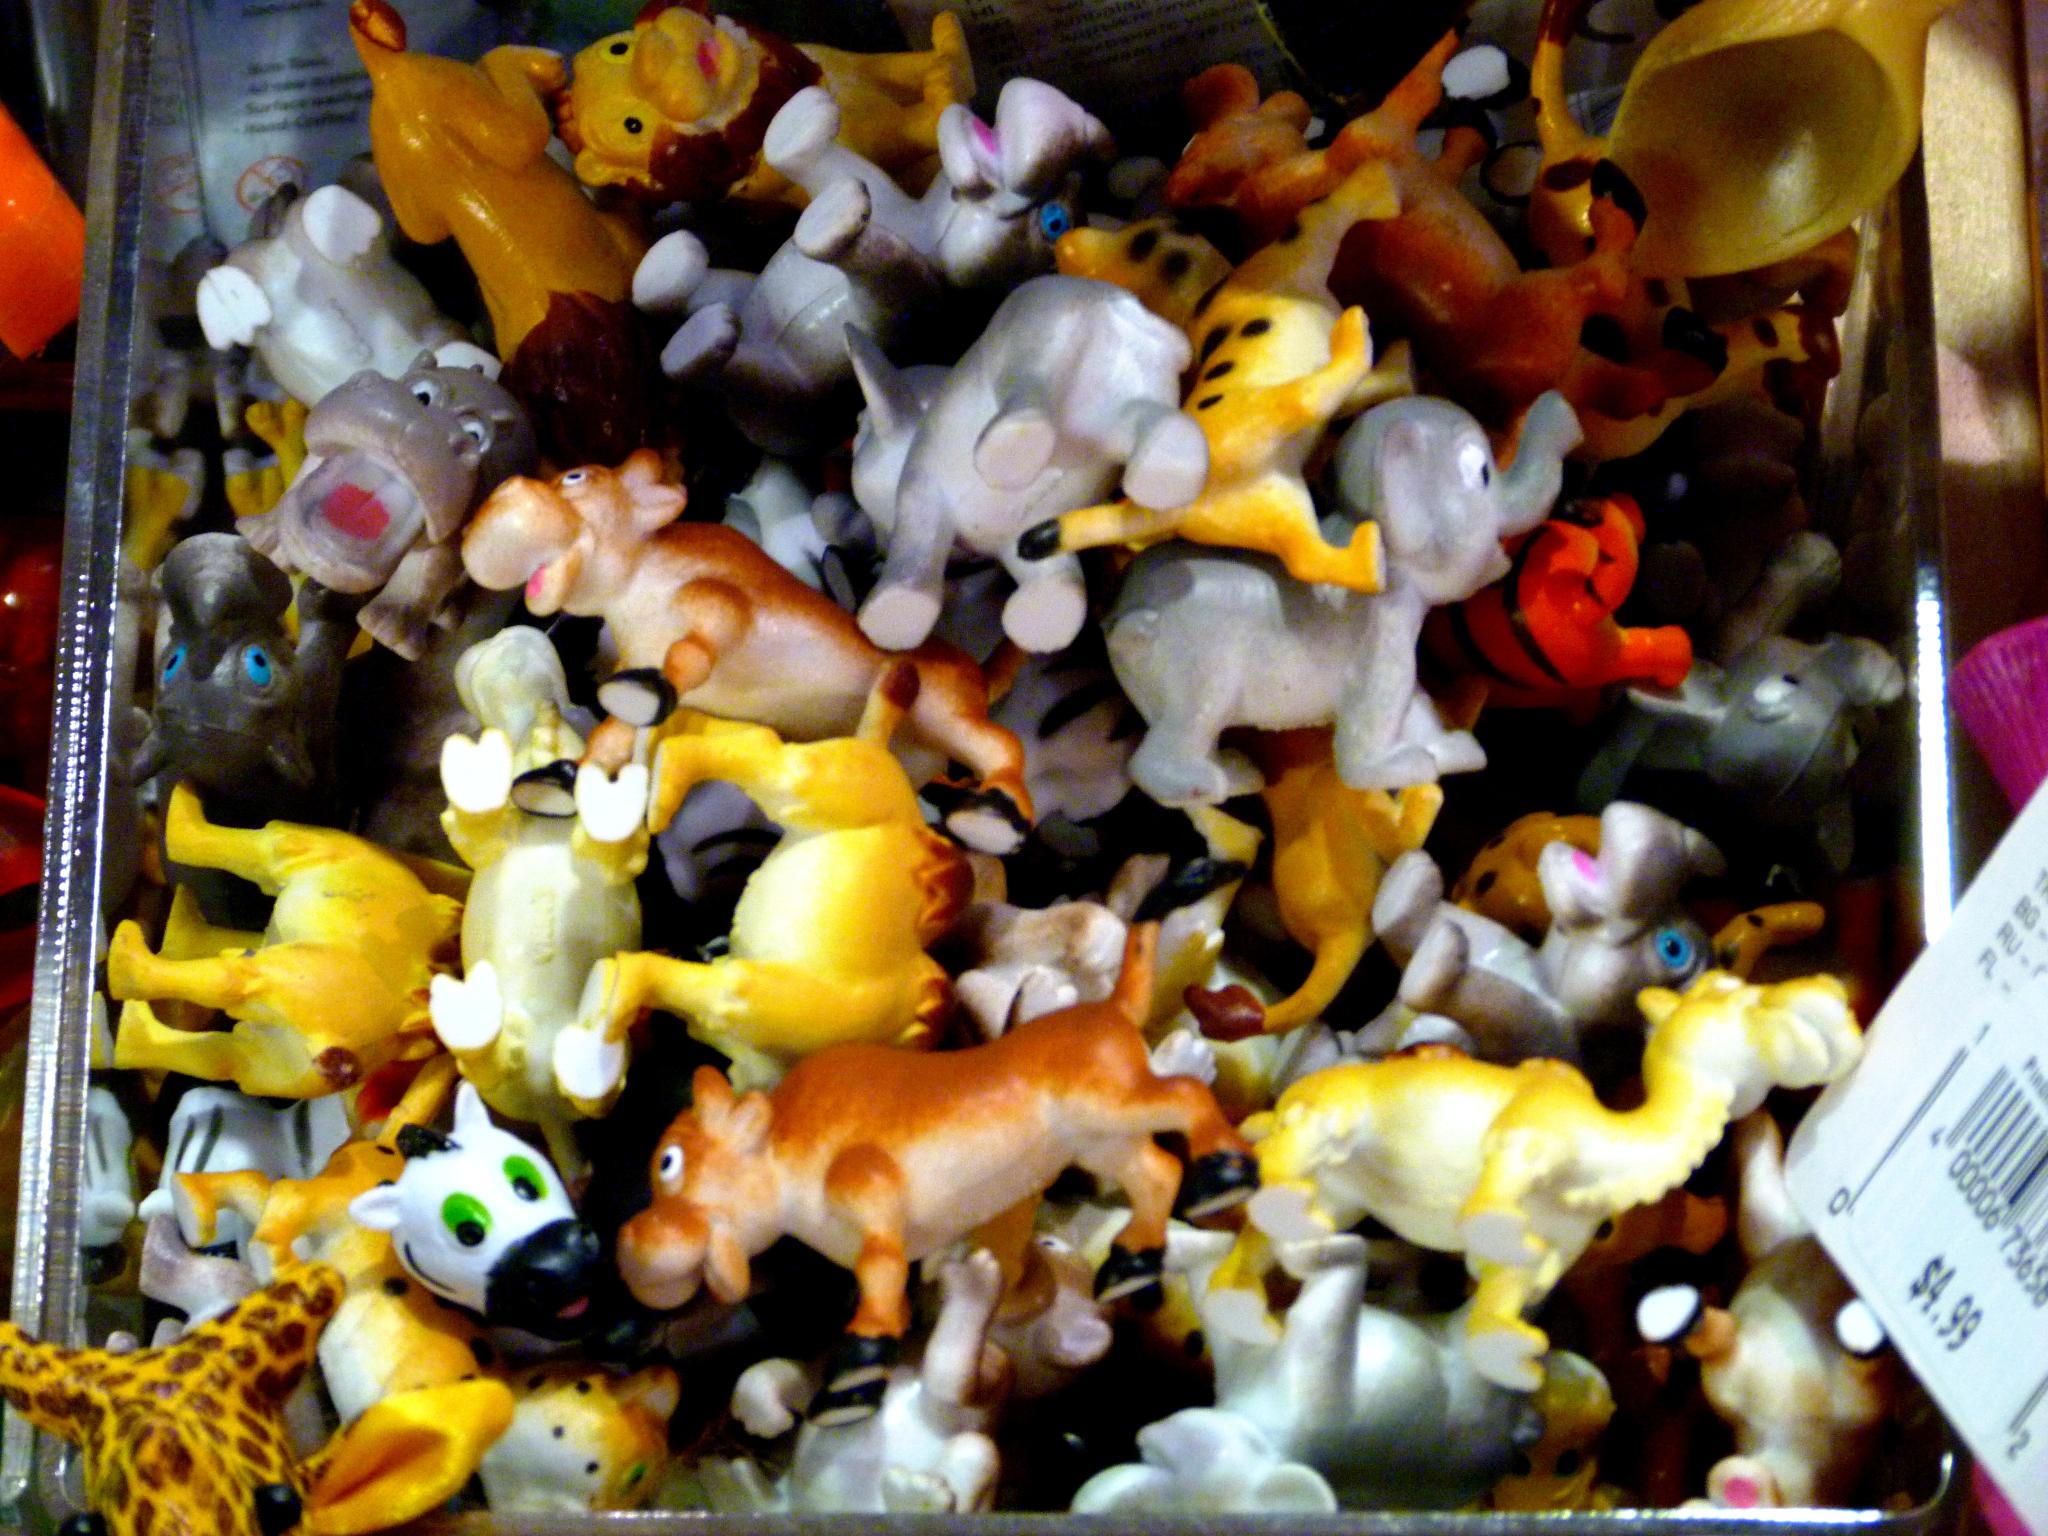 there are many small plastic toy animals in this container